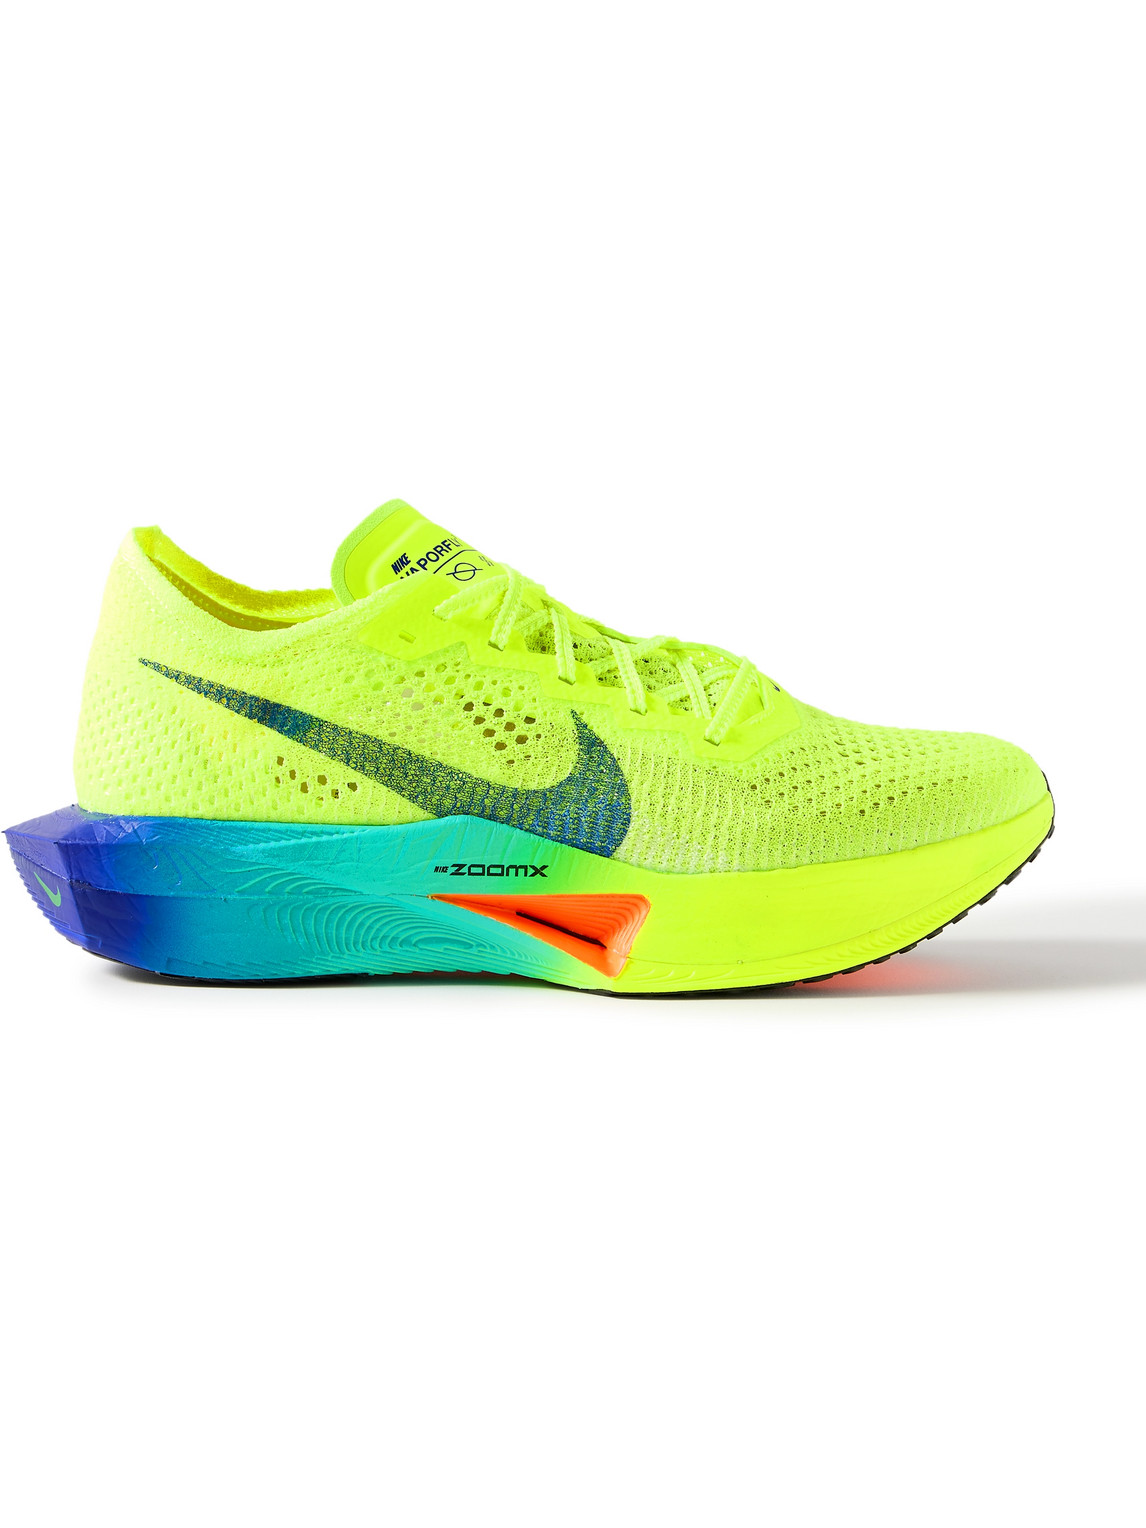 Nike Zoomx Vaporfly 3 Flyknit Running Sneakers In Yellow